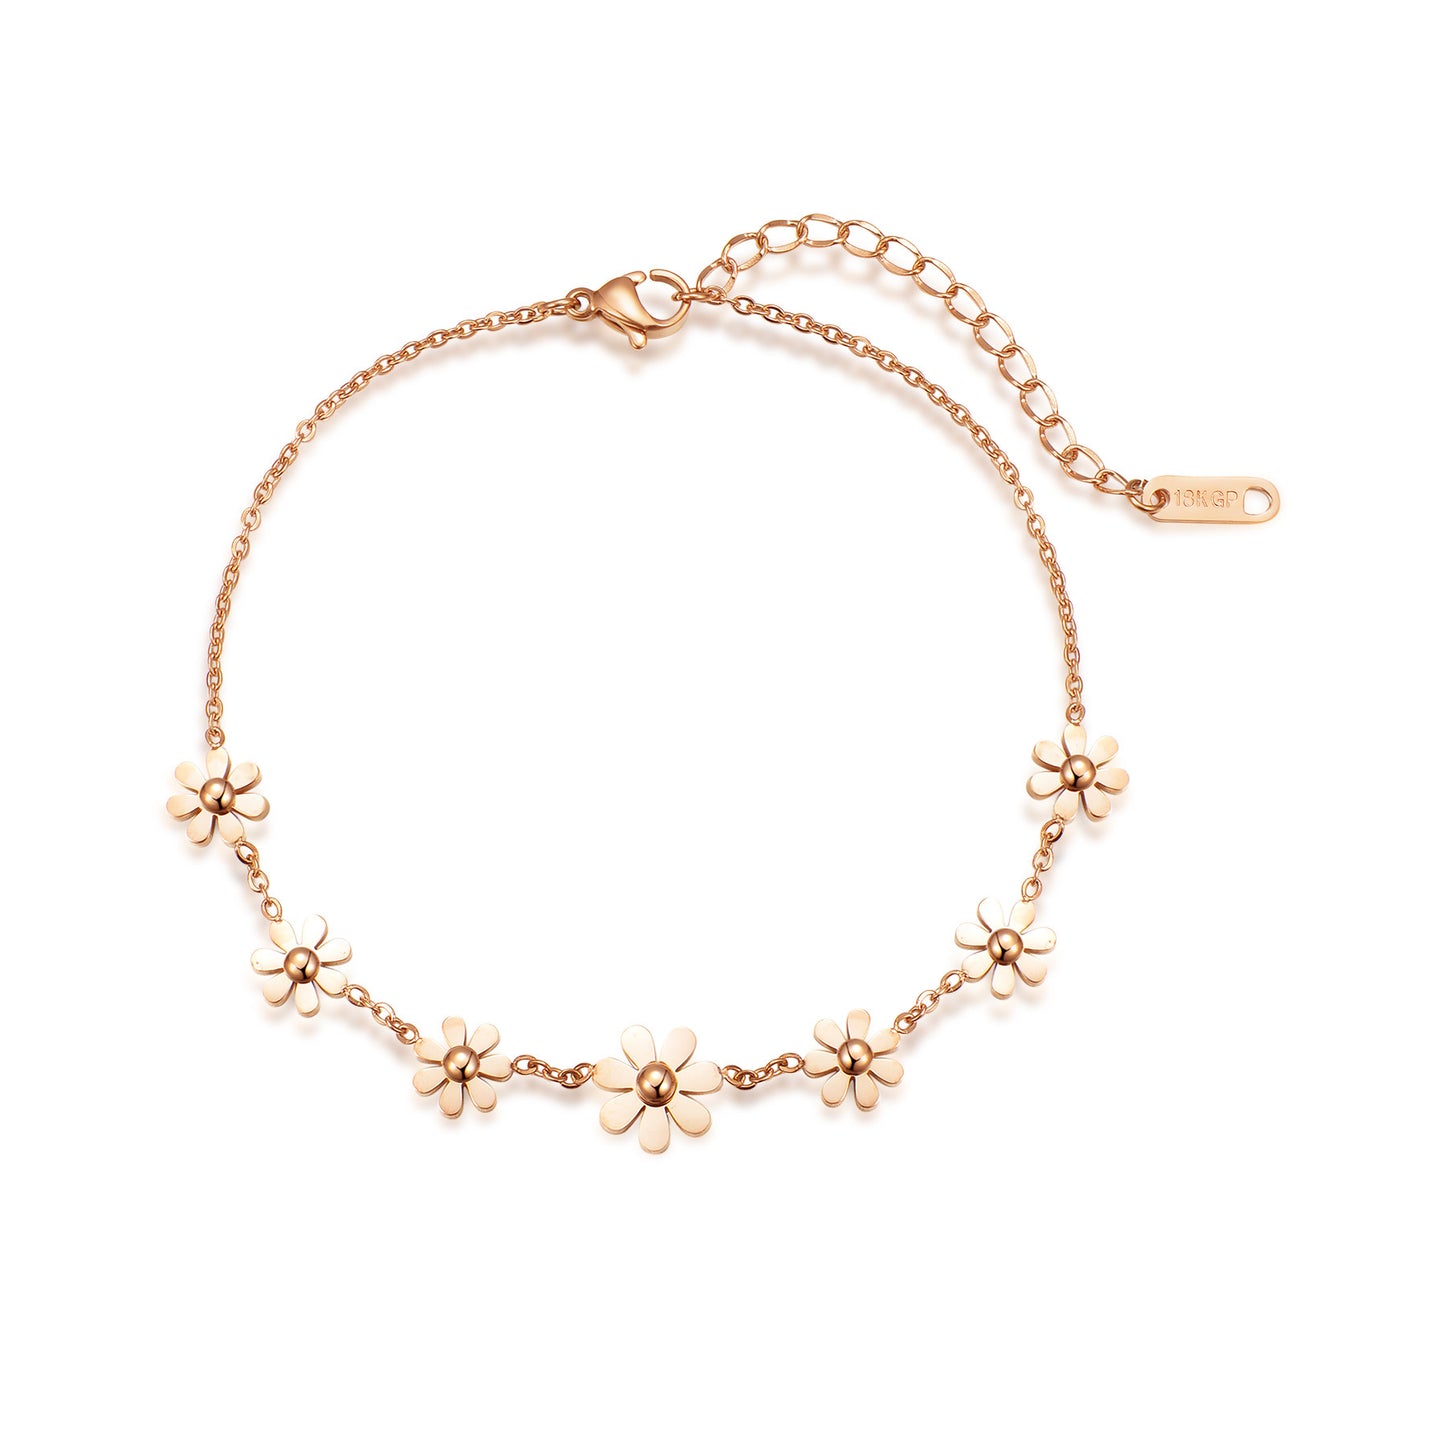 Net Red Summer Explosion Style Korean Version Of The Simple Titanium Steel Anklet Female Rose Gold Does Not Fade Personality All-match Niche Foot Accessories